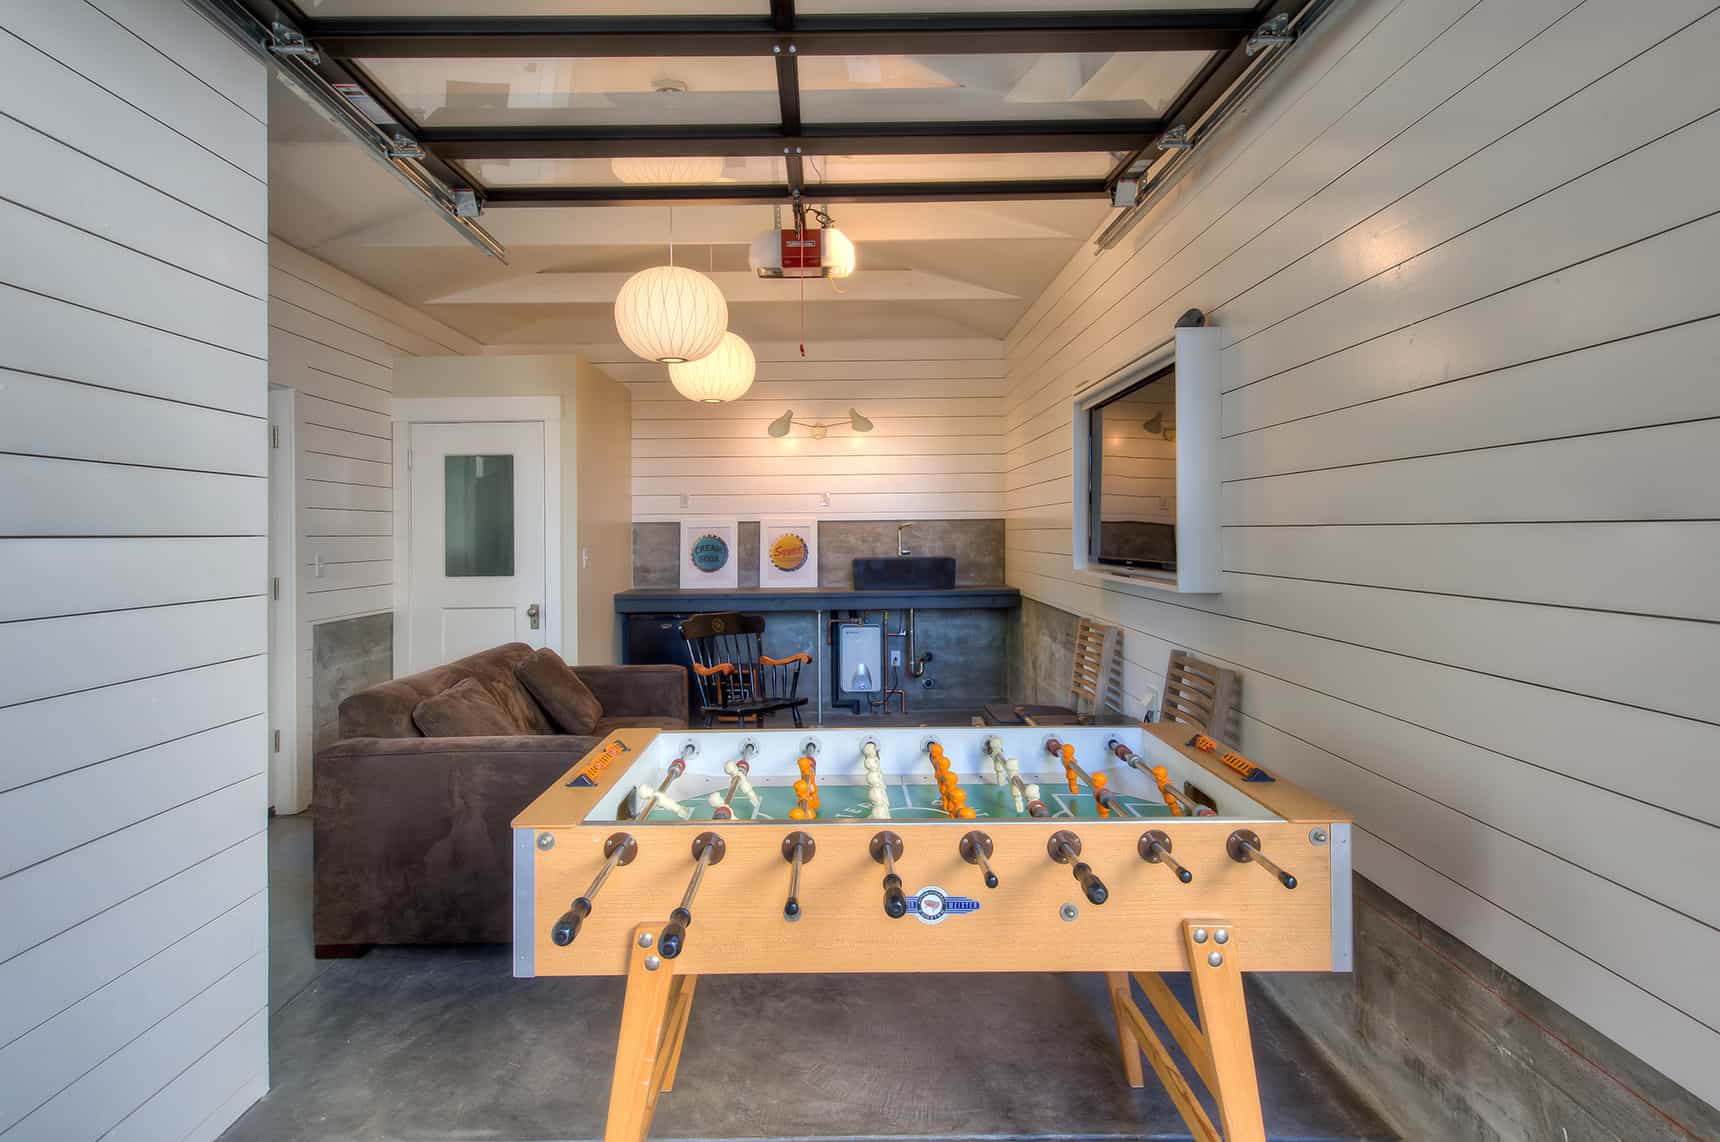 Foosball game in retro remodeled home.